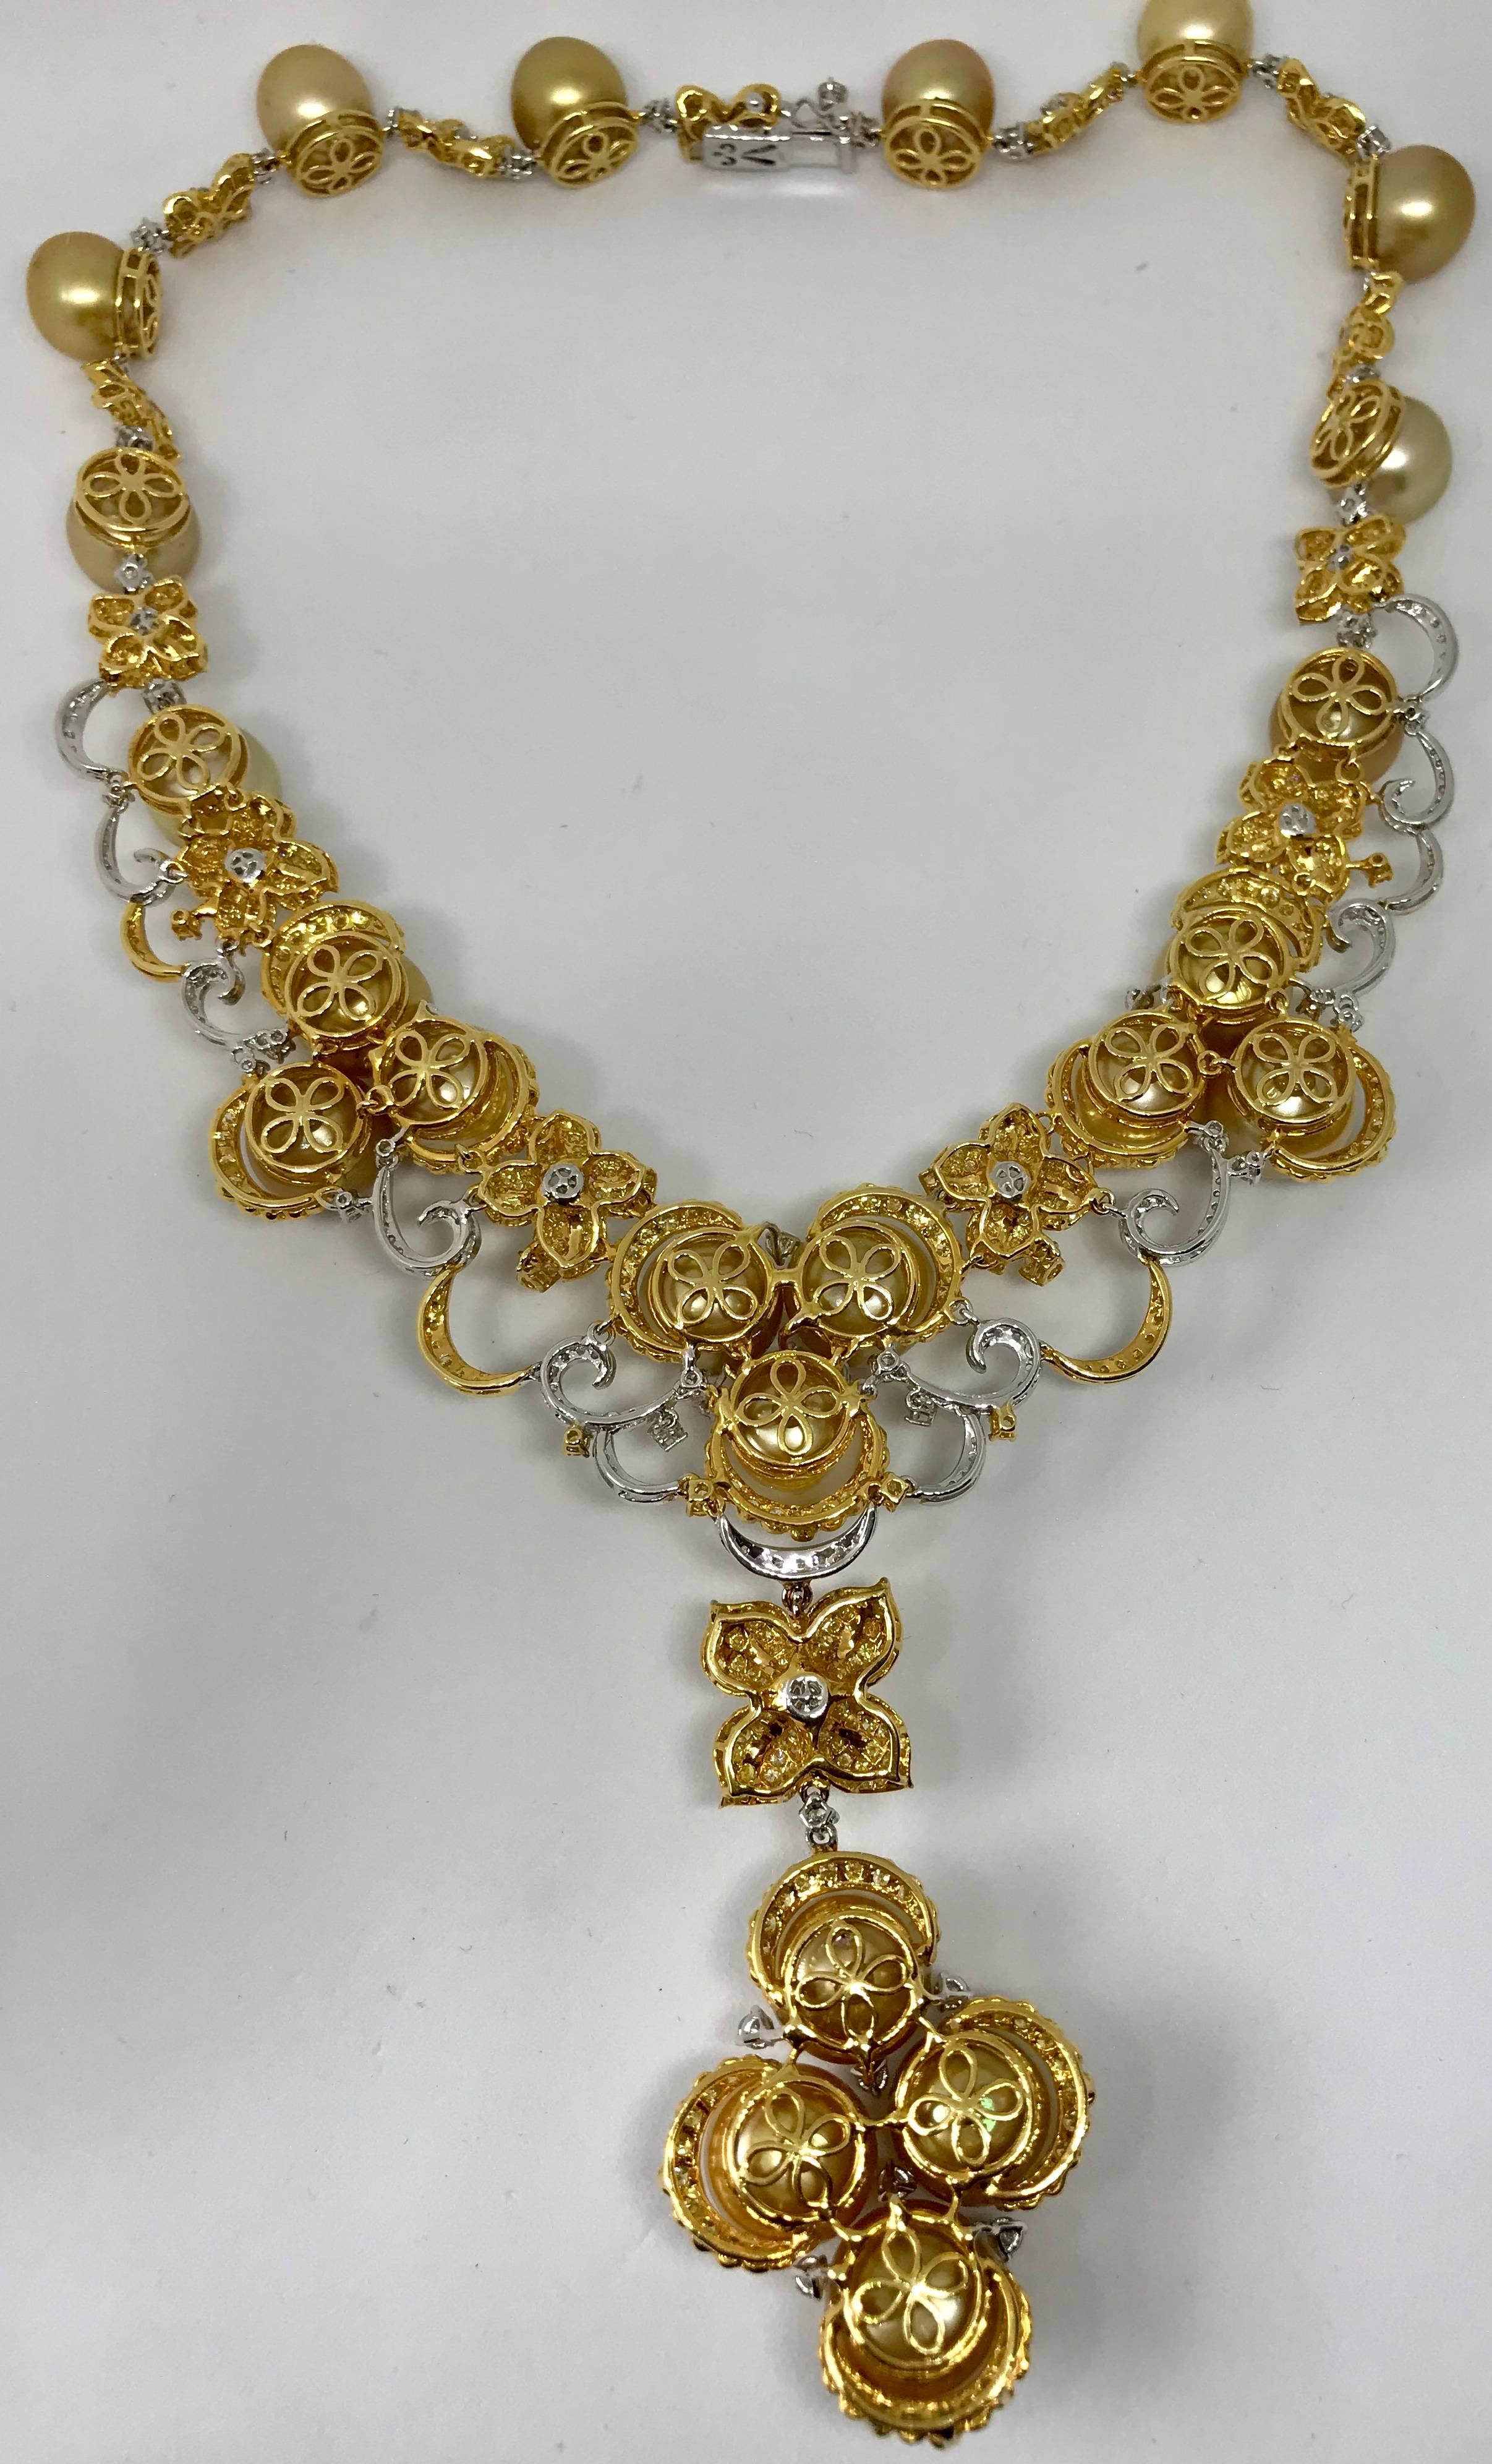 Golden South Sea Pearl Necklace with Diamonds and 18kt Gold 64.26 grams In New Condition For Sale In New York, NY